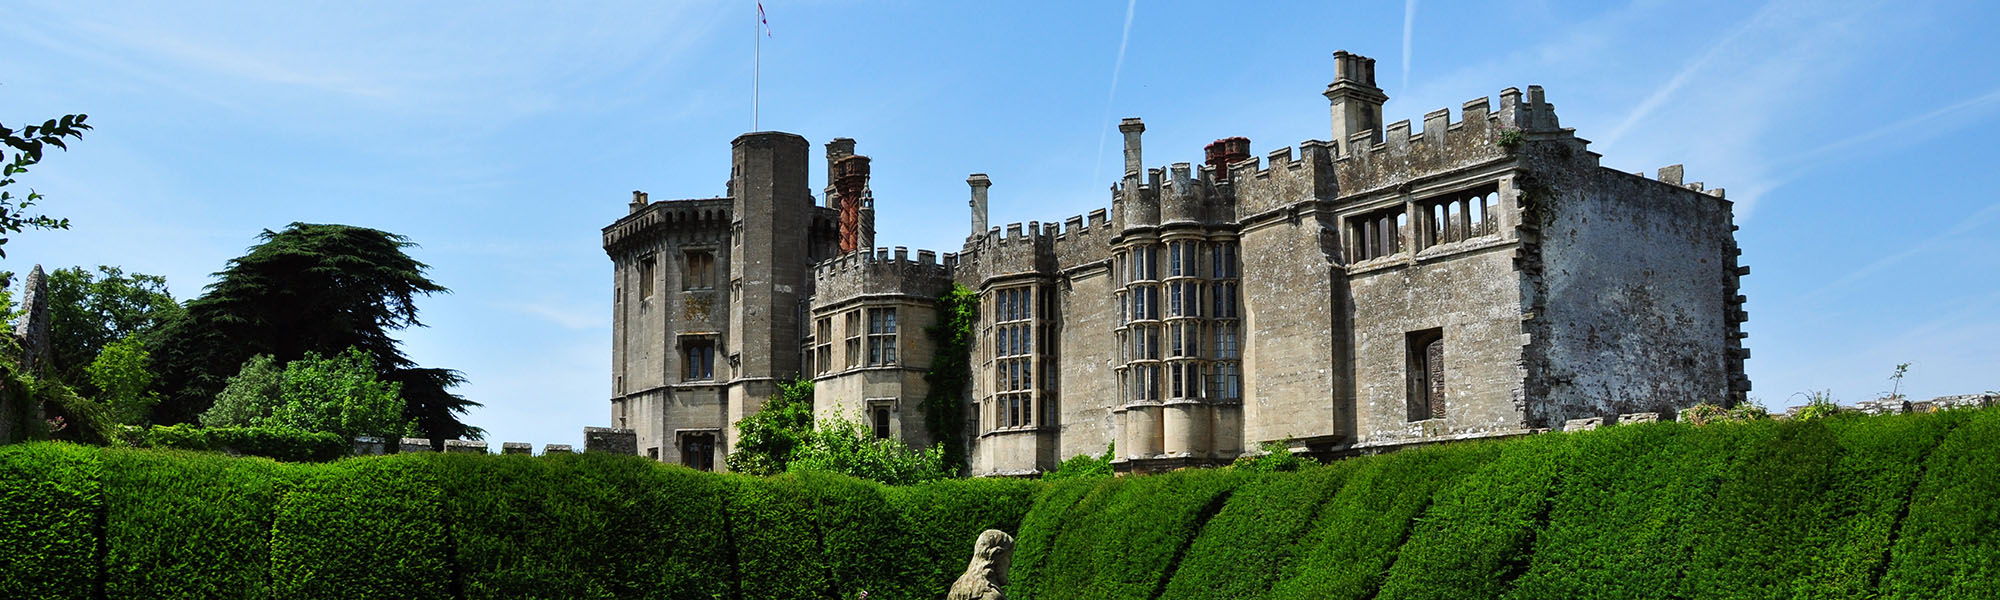 tourhub | Just Go Holidays | Majestic Castles & Homes of Glorious Gloucestershire 